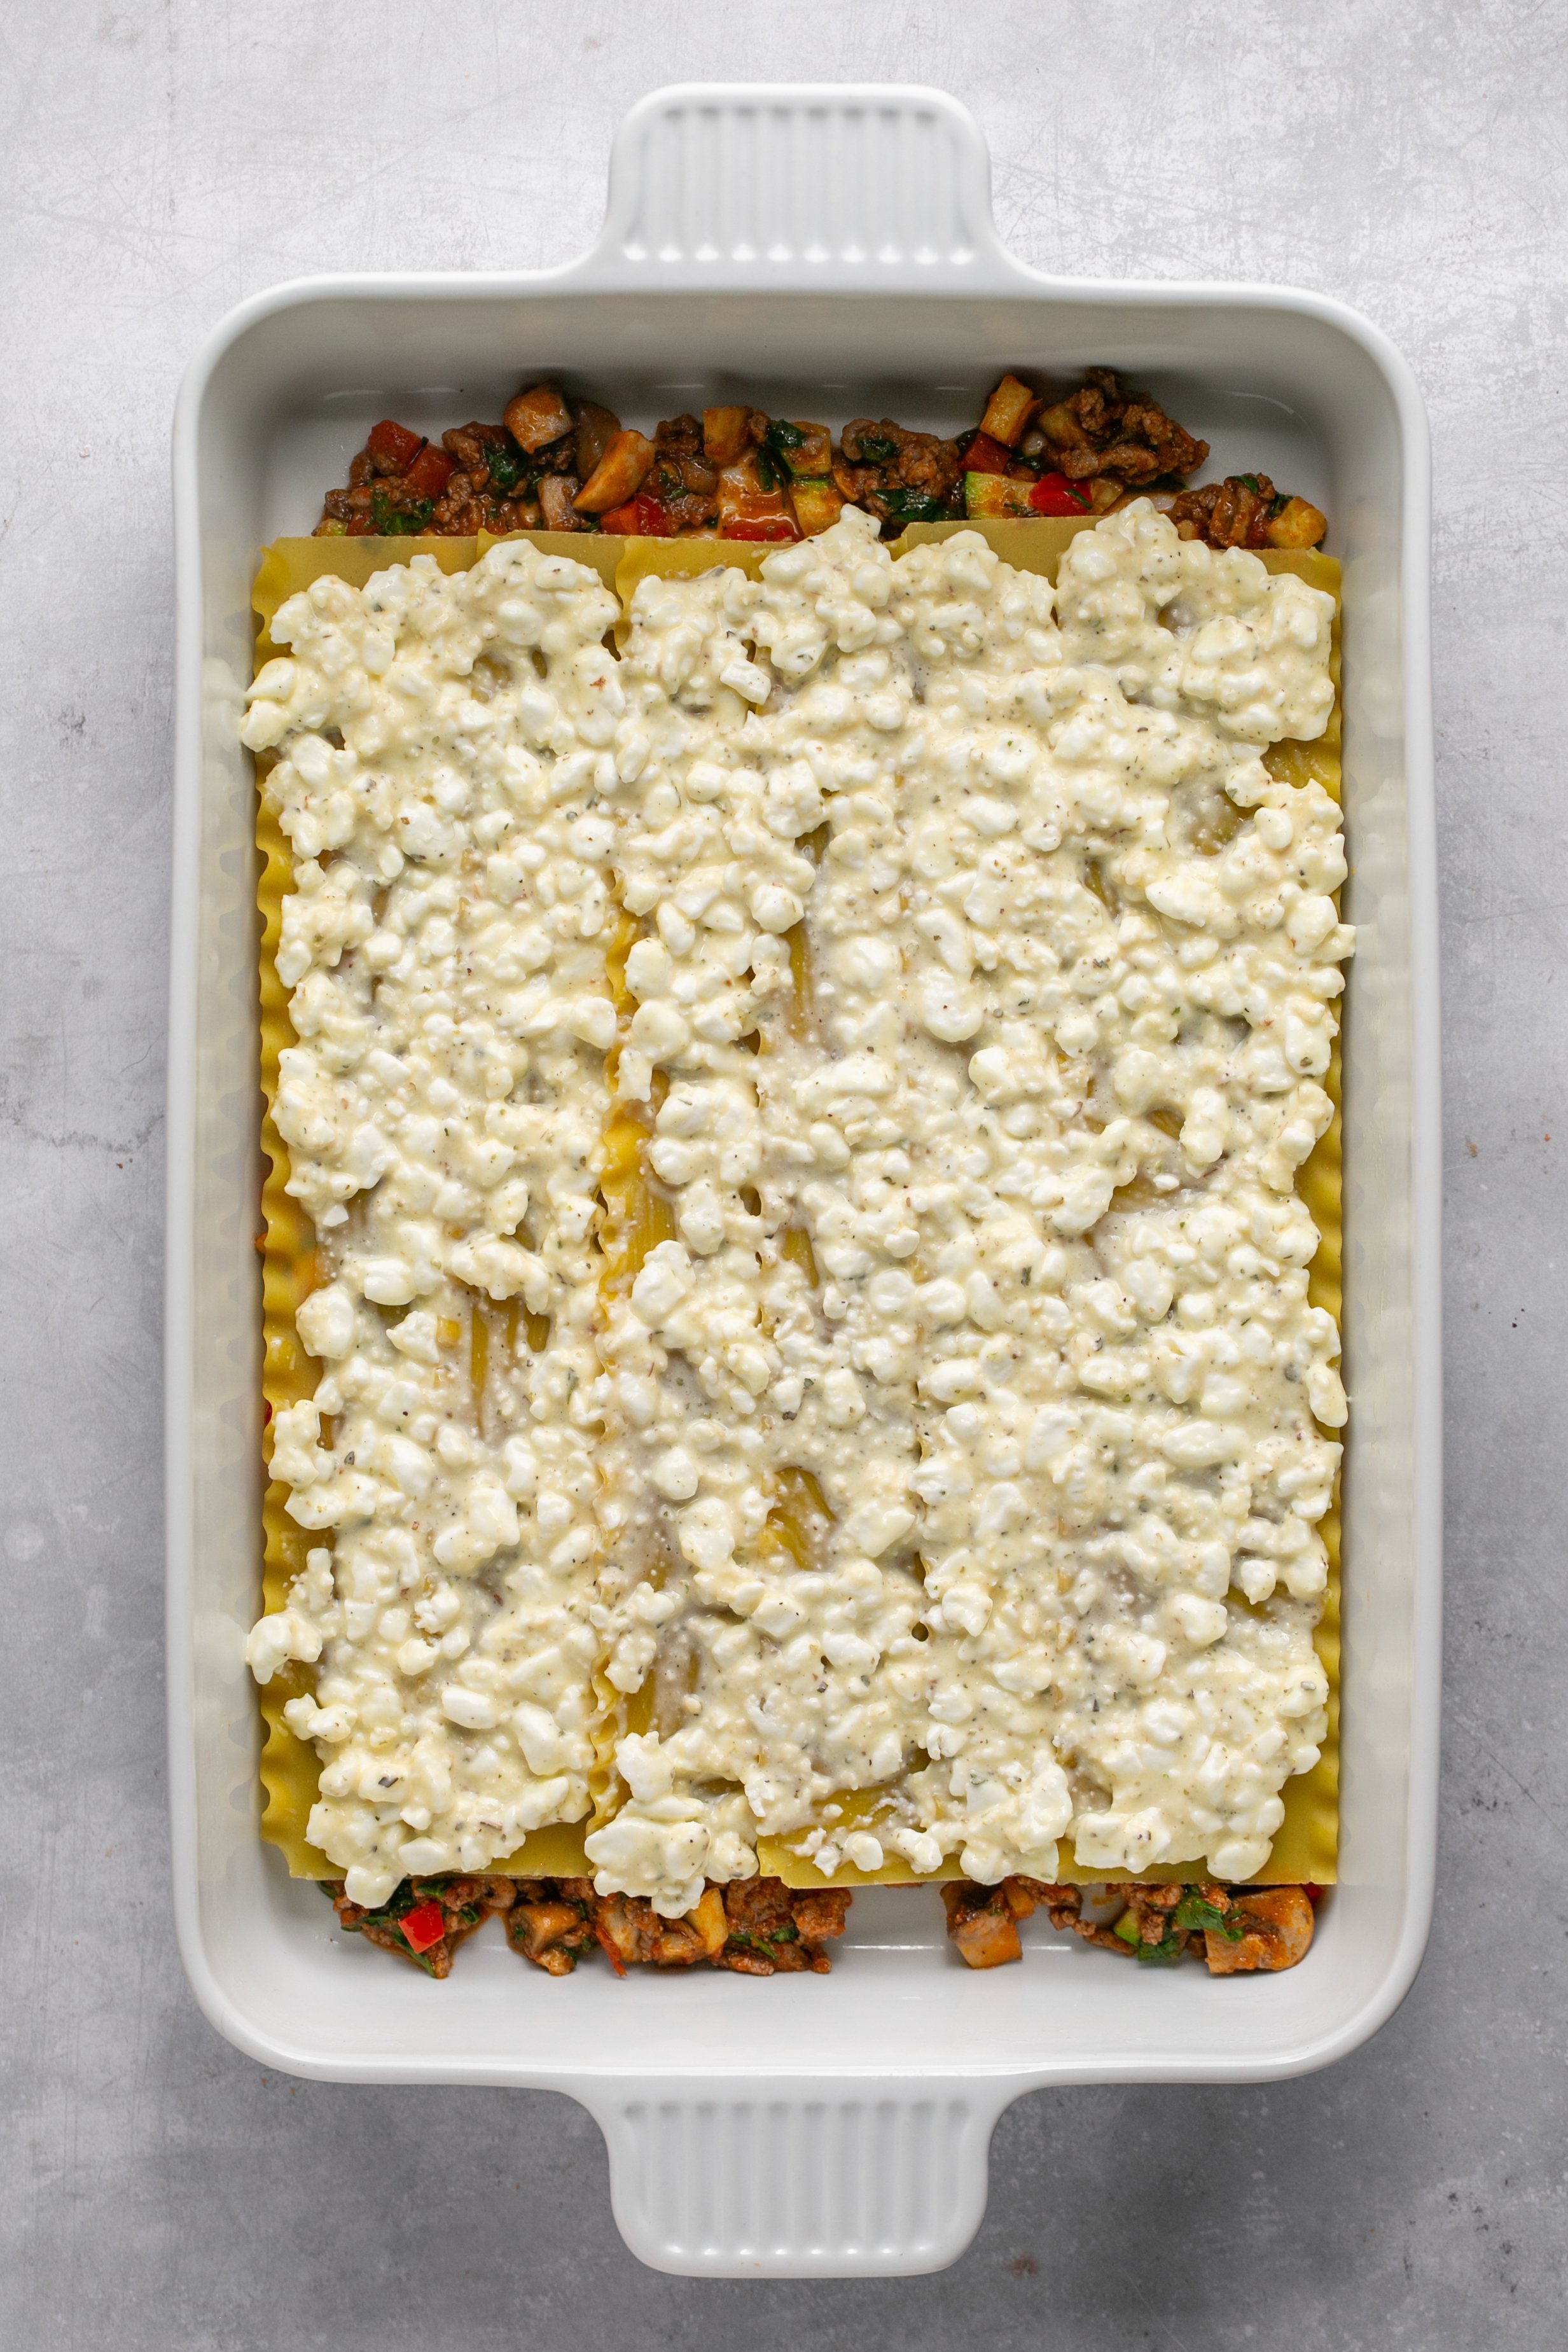 A white casserole dish filled with a layer of vegetable and ground meat mixture, topped with rows of uncooked lasagna noodles. Uncooked lasagna noodles are topped with cheese mixture spread out in an even layer.